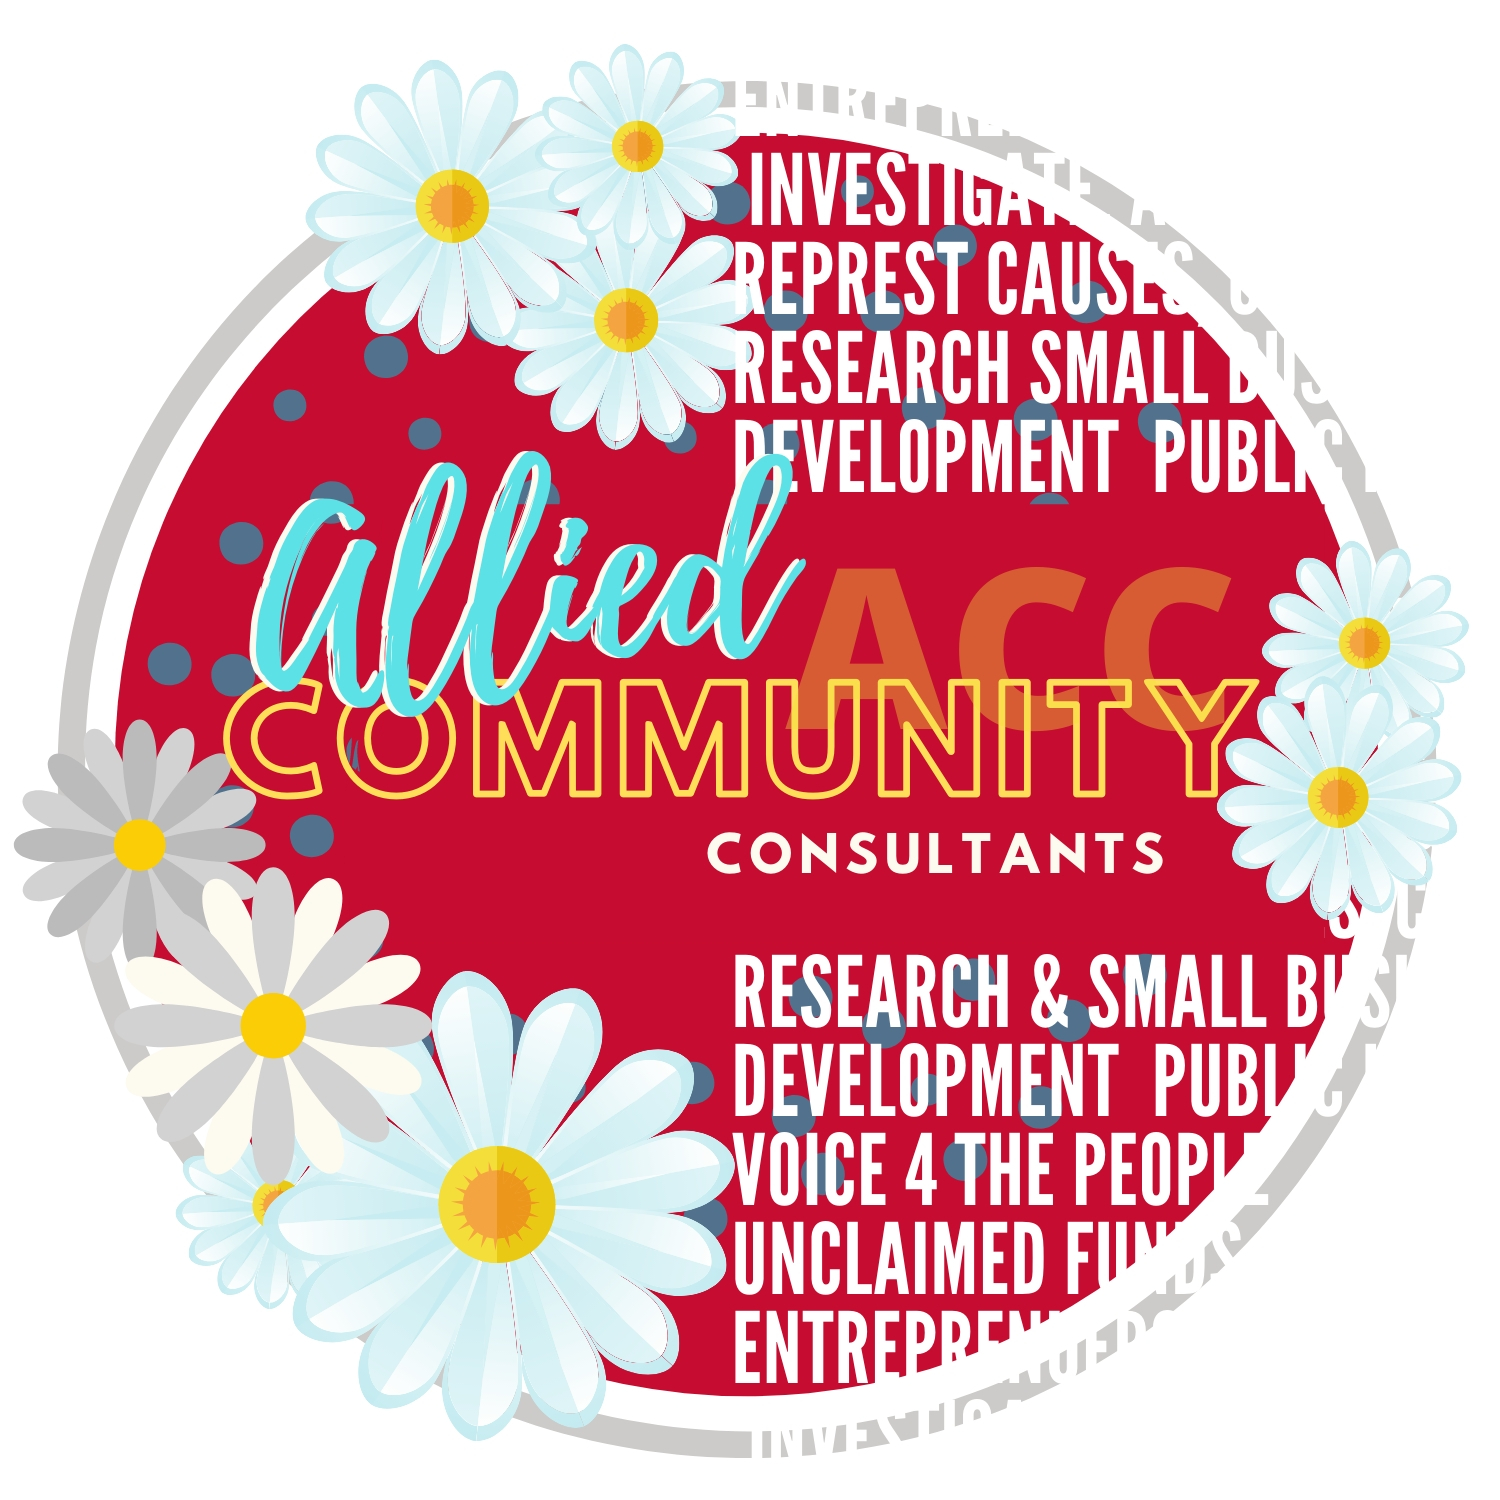 Allied Community Consultants